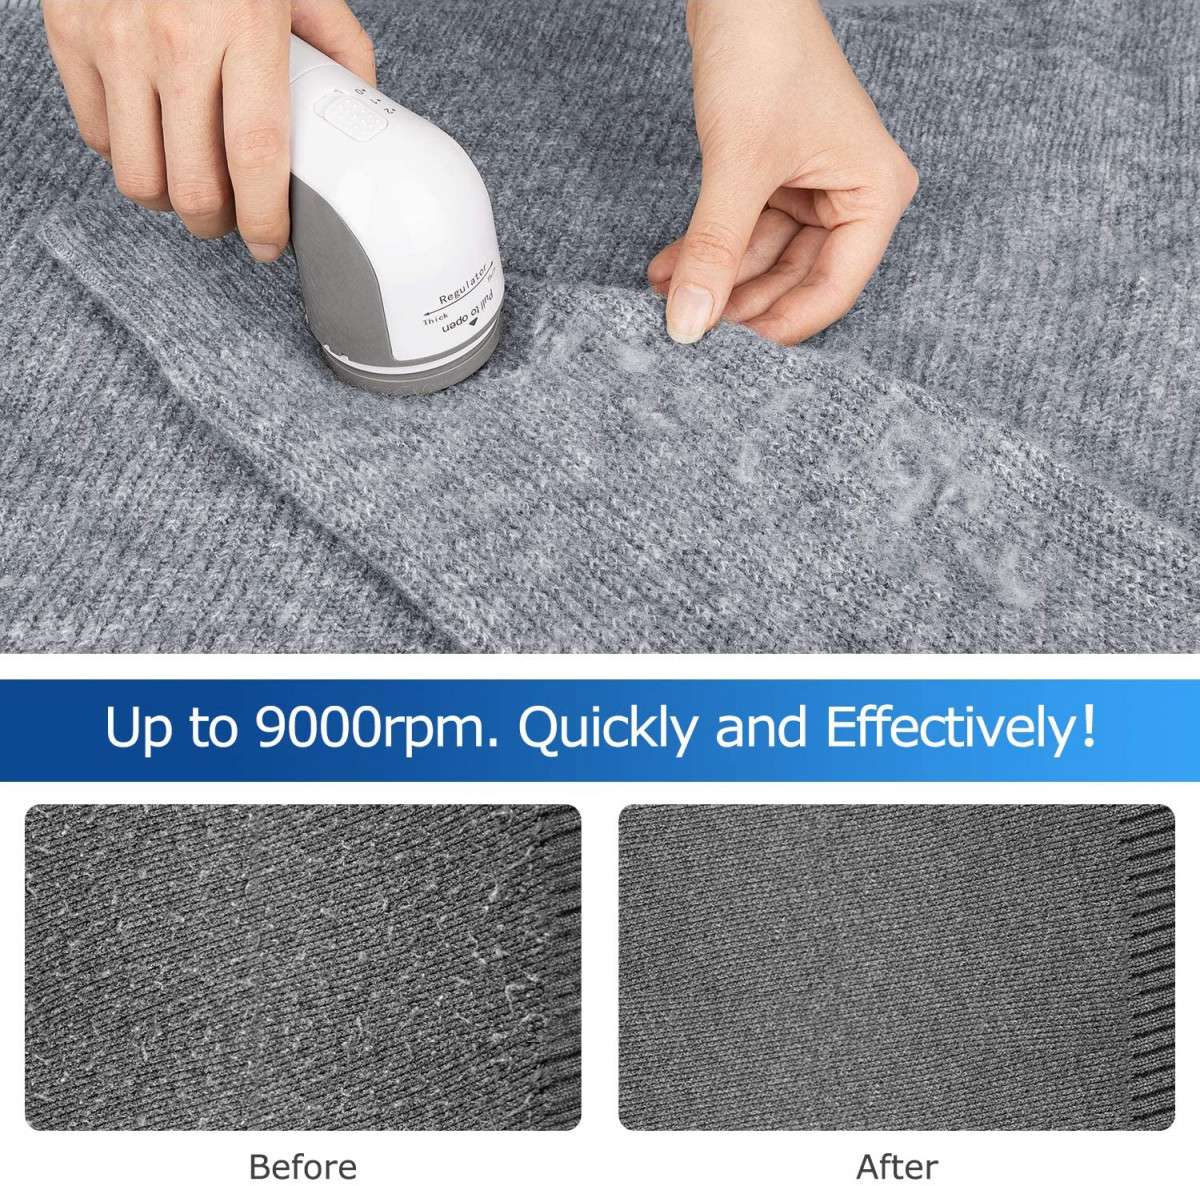 Alea's Deals 43% Off Fabric Shaver and Lint Remover! Was $19.99!  